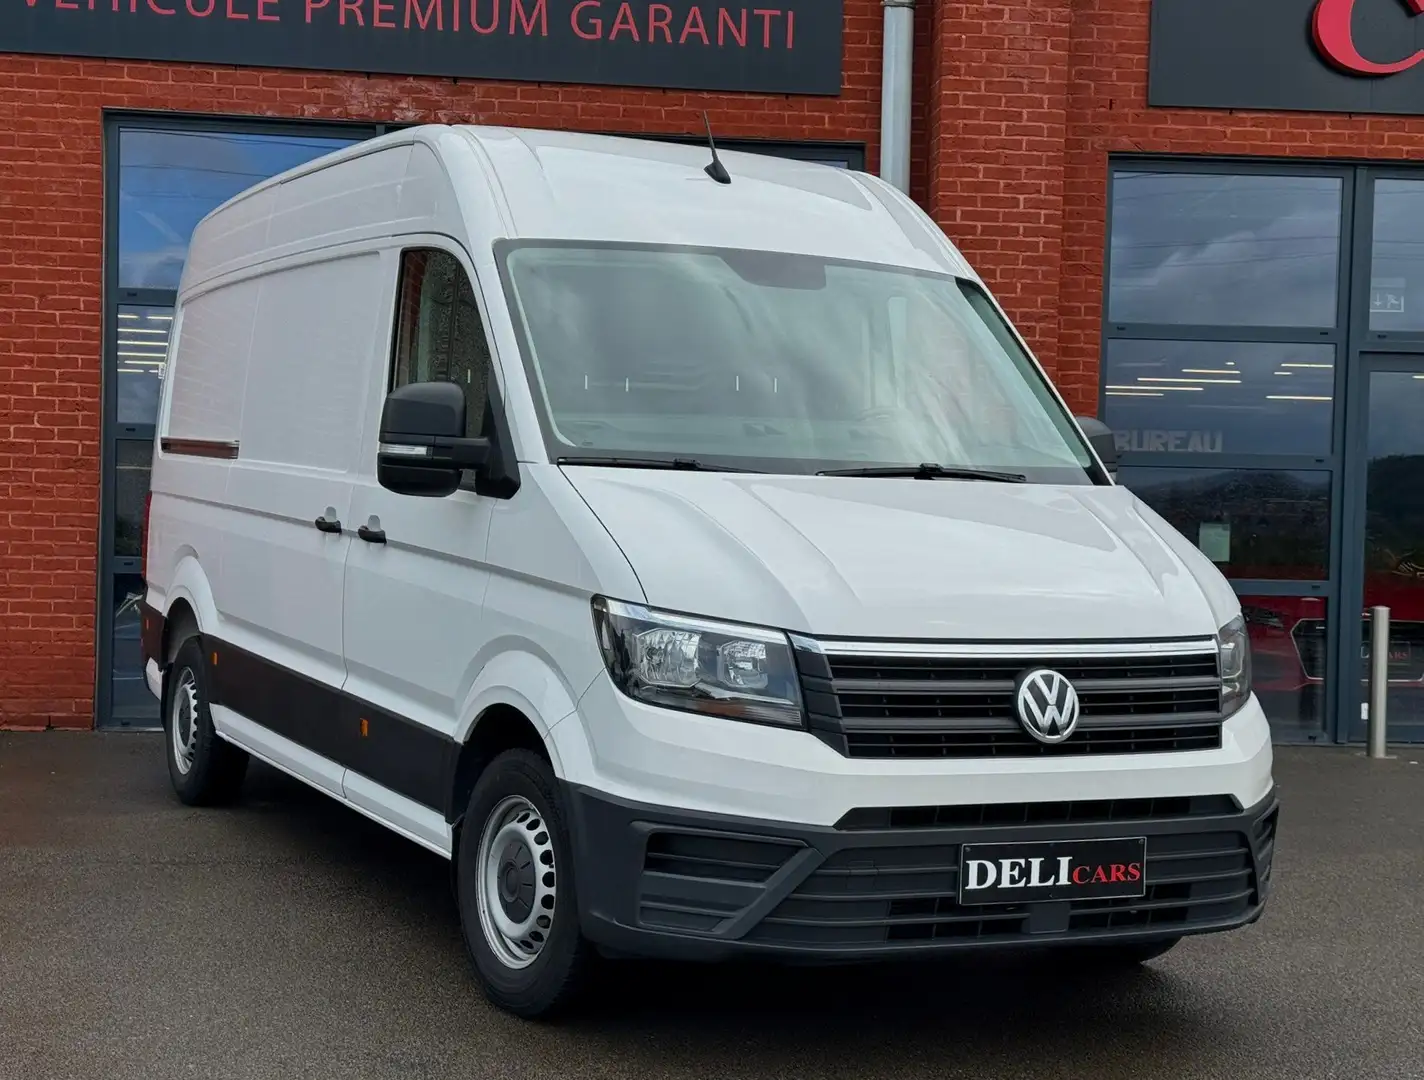 Volkswagen Crafter 2.0 TDI L3H3 Dsg Tvac 3Places Camera Apple/Androi Wit - 1